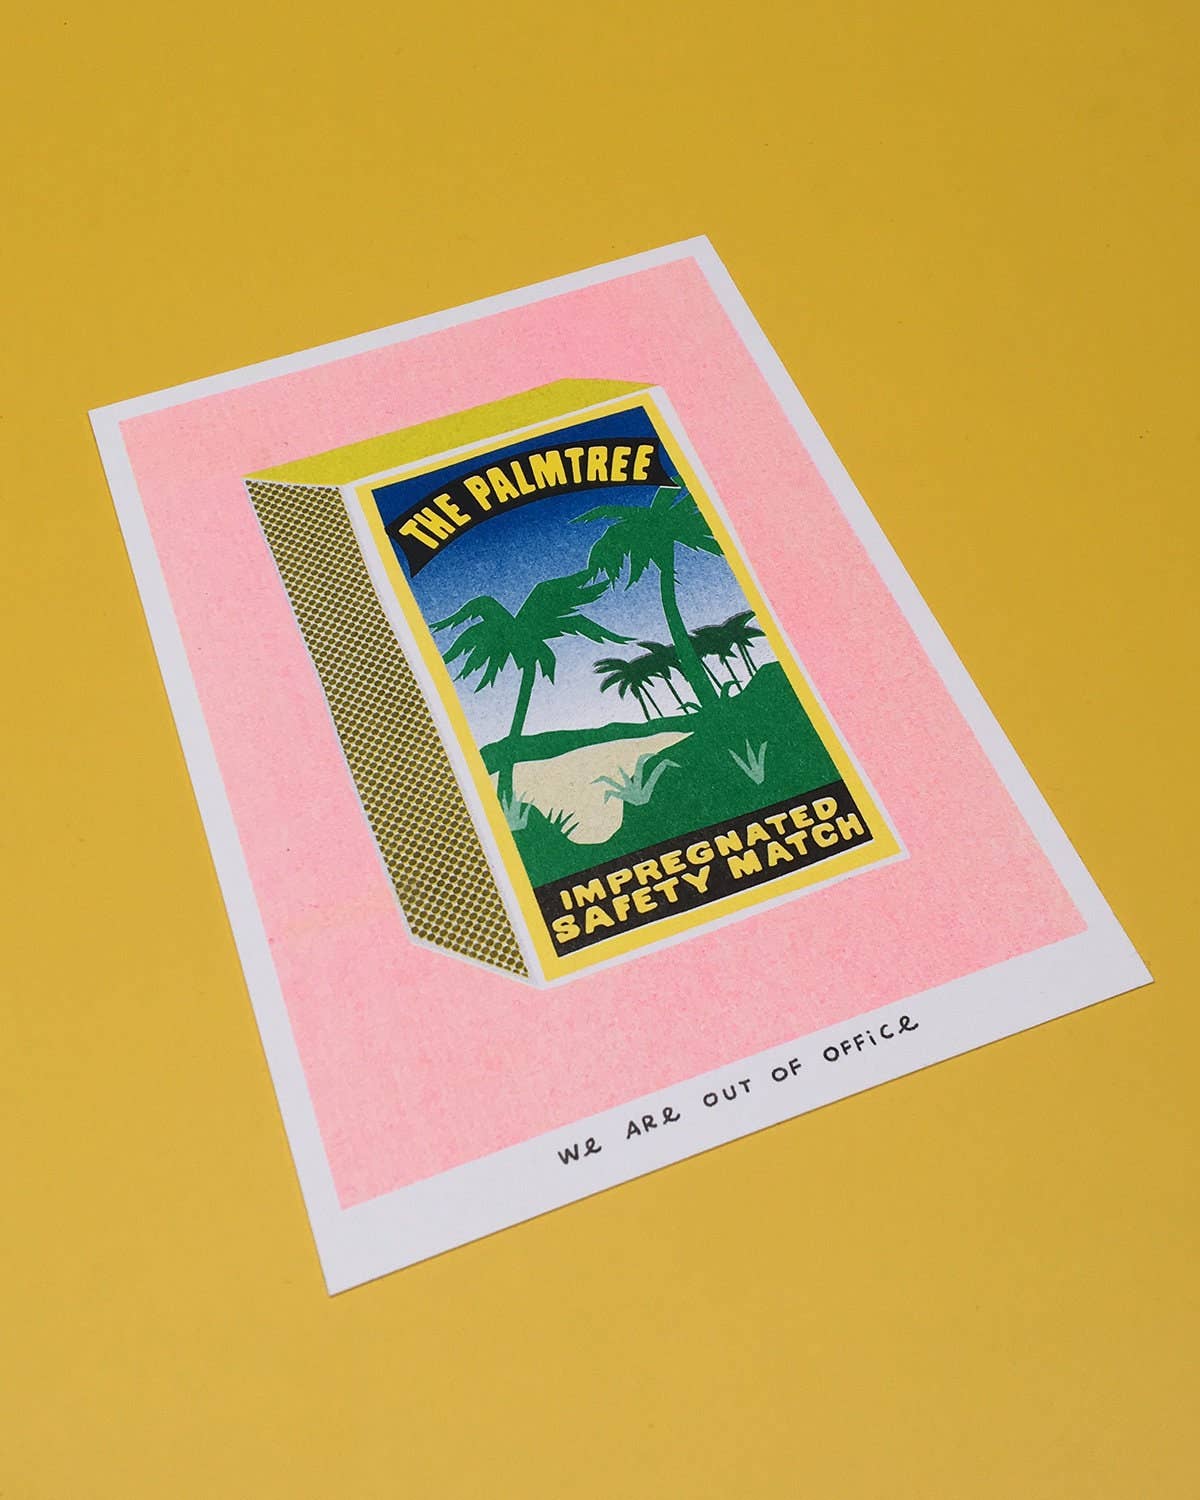 We Are Out of Office - A Risograph Print of a Palmtree Matchbox - Ensemble Studios